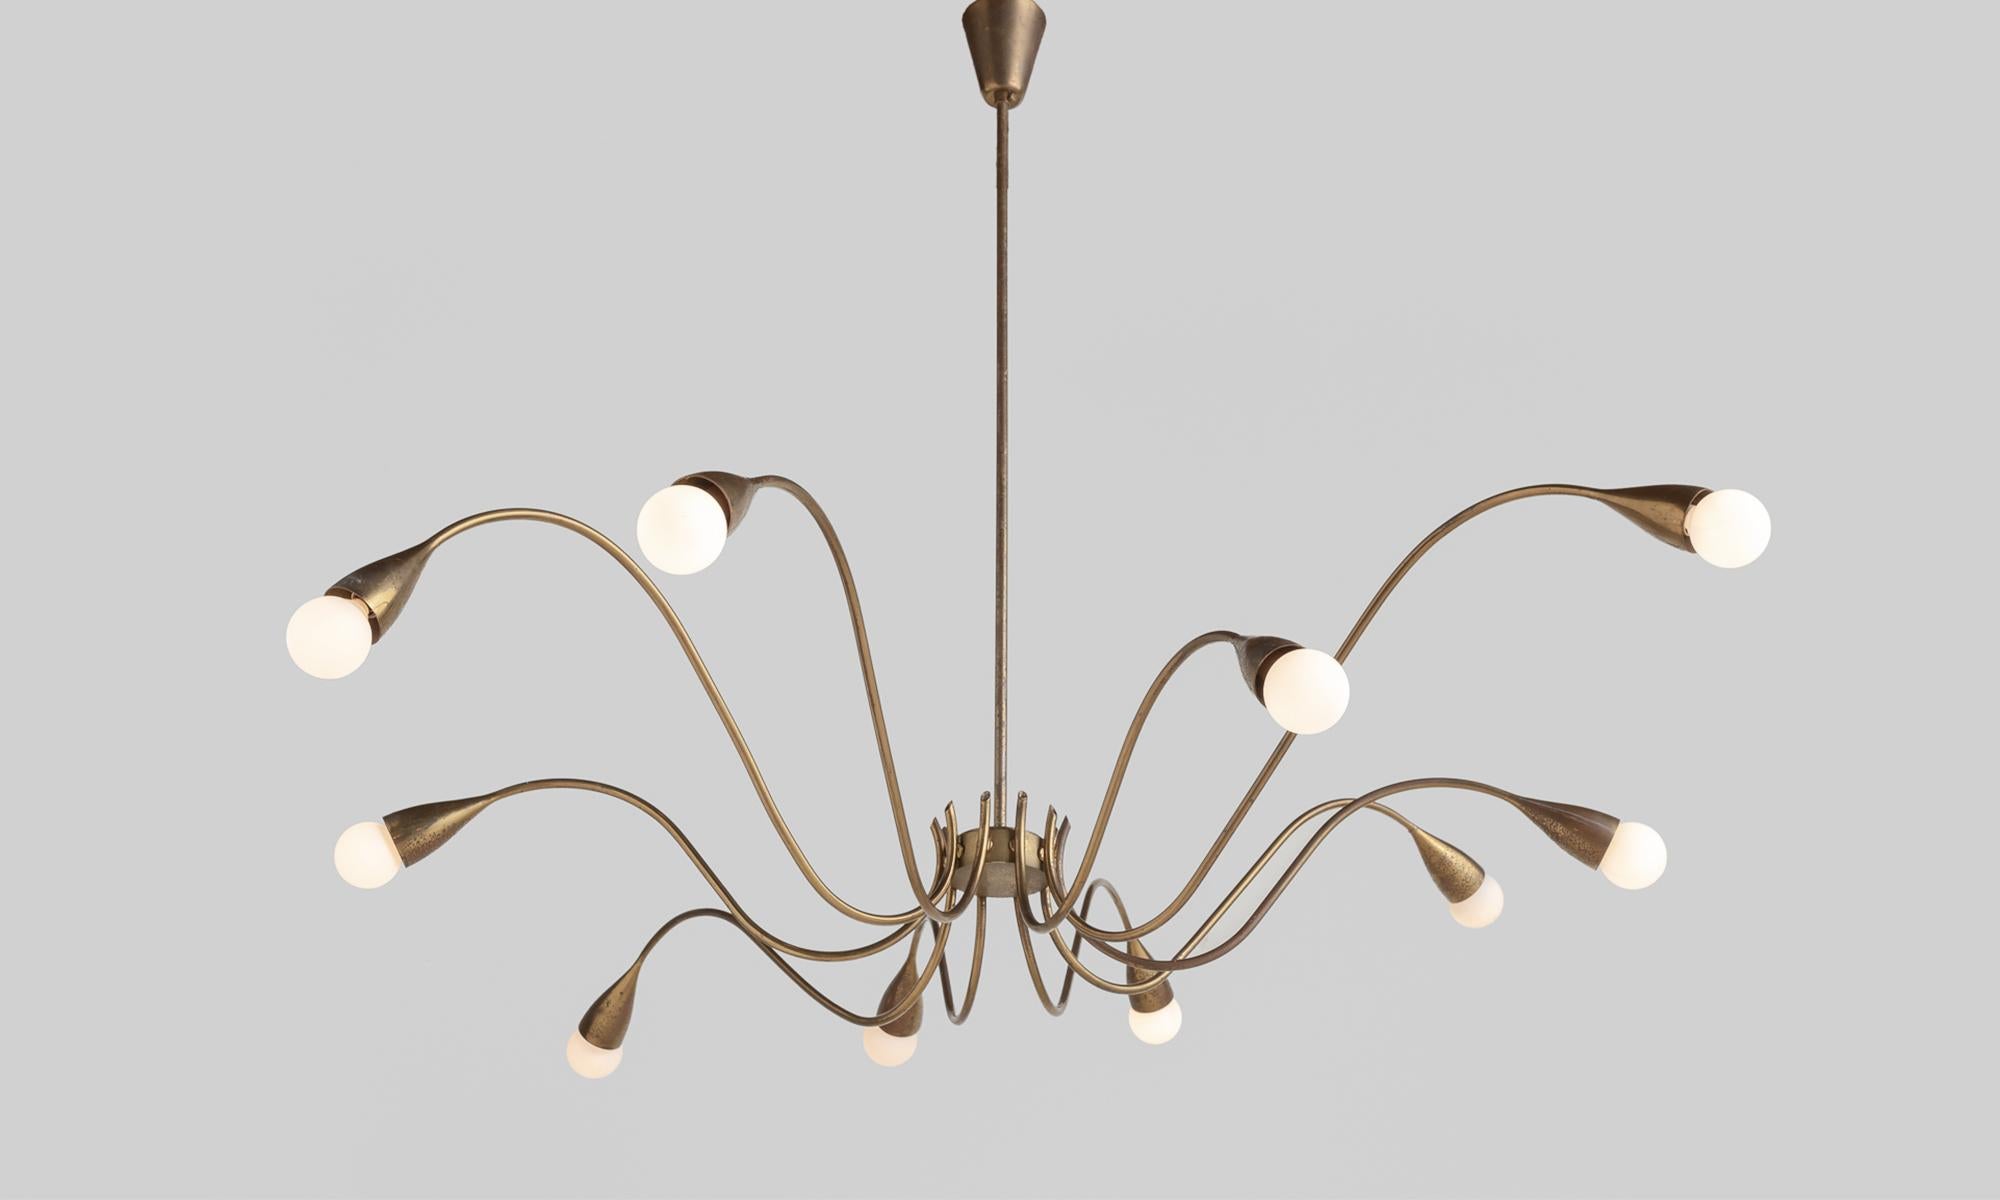 Brass Suspension Chandelier, Italy, circa 1950

Beautifully crafted brass chandelier with 10 curved arms.

Measures: 48